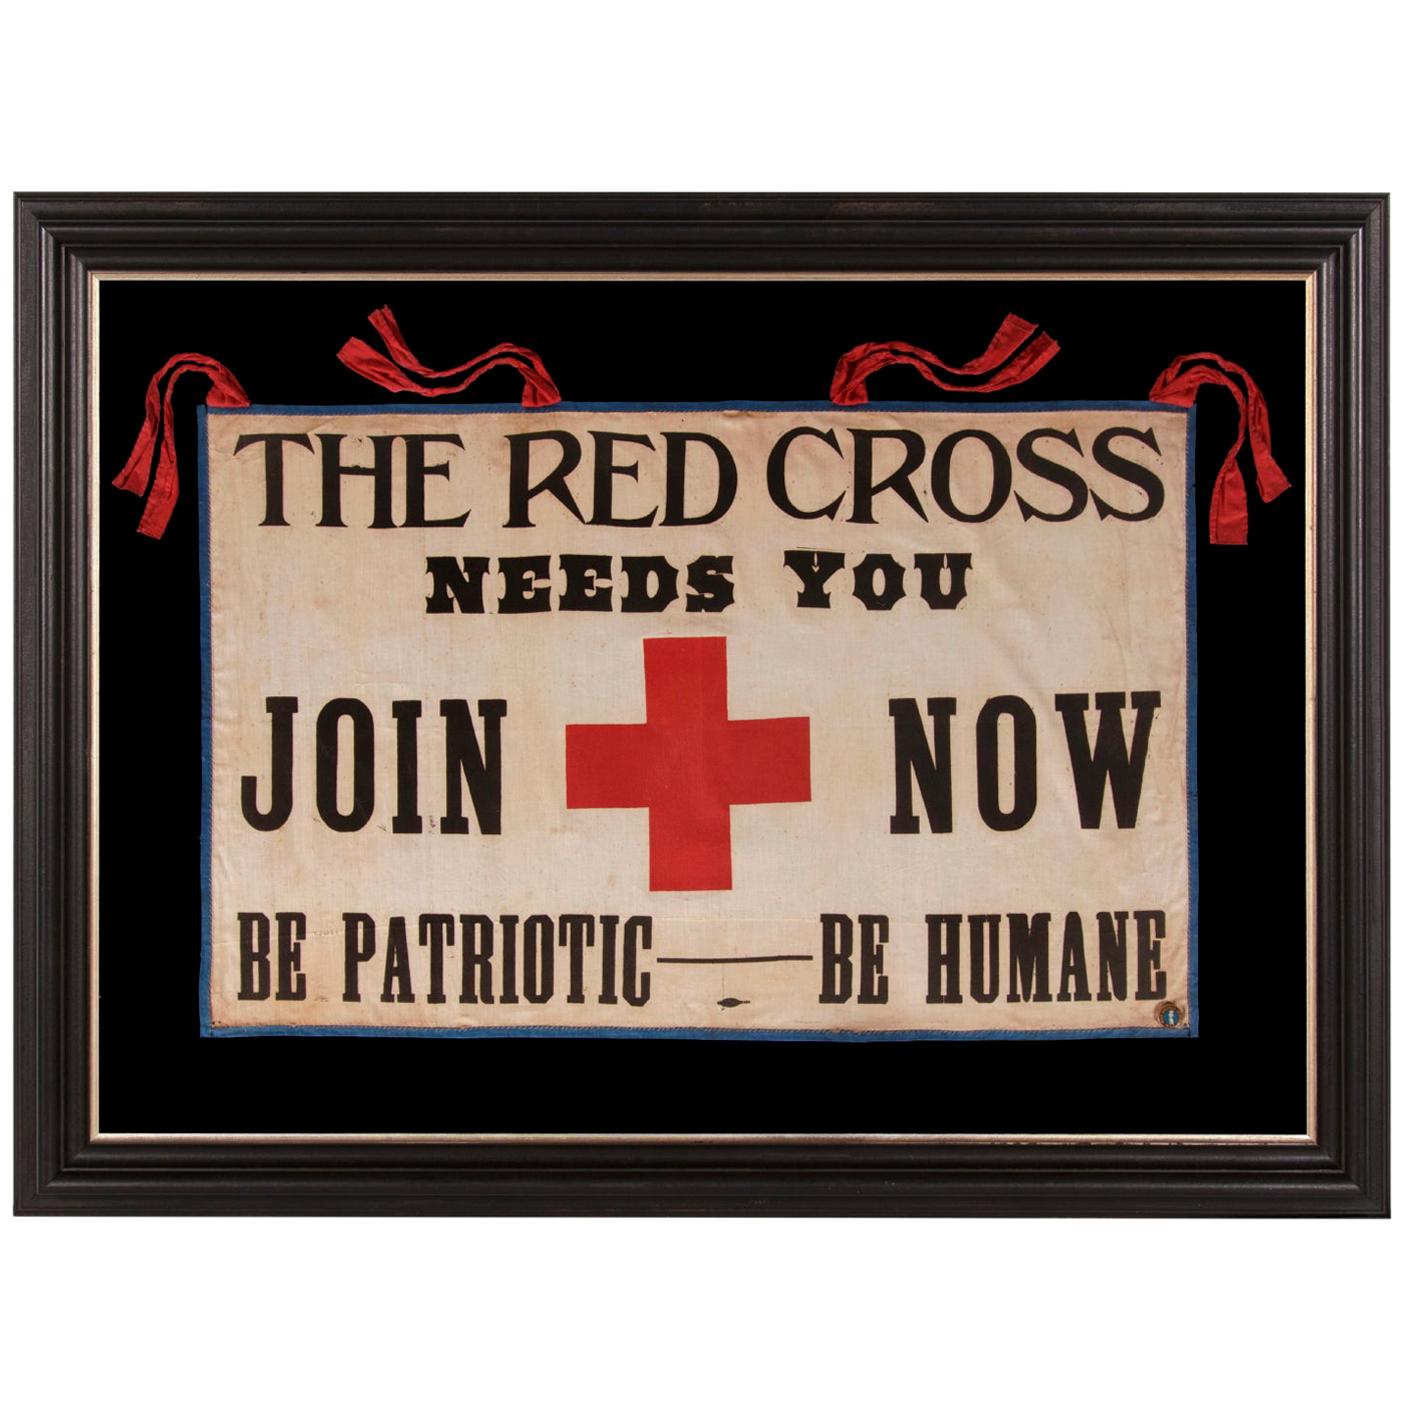 Exceptional Red Cross Banner 